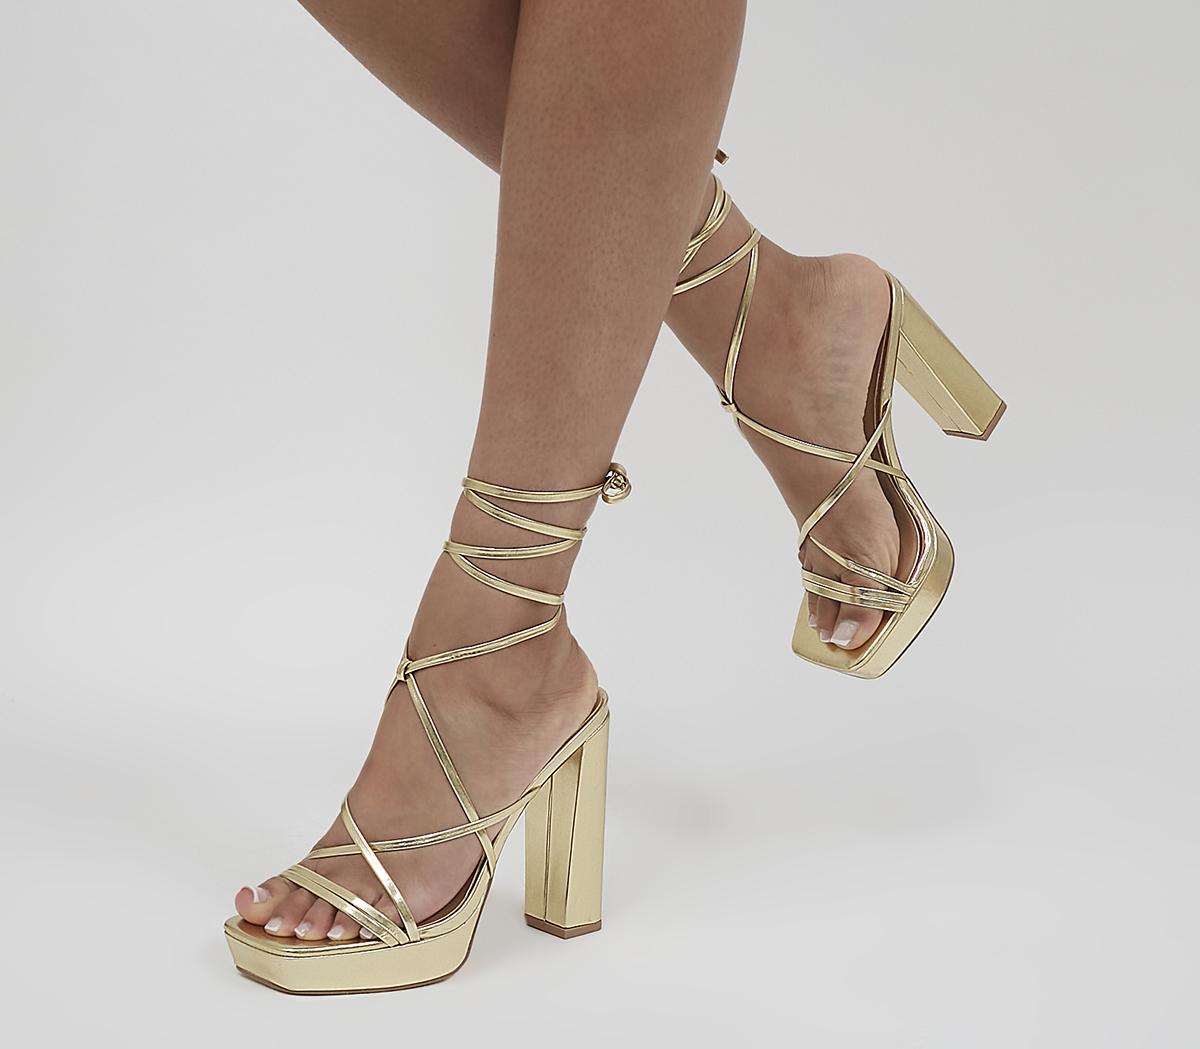 OFFICEHaisley Tie Up Platform ShoesGold